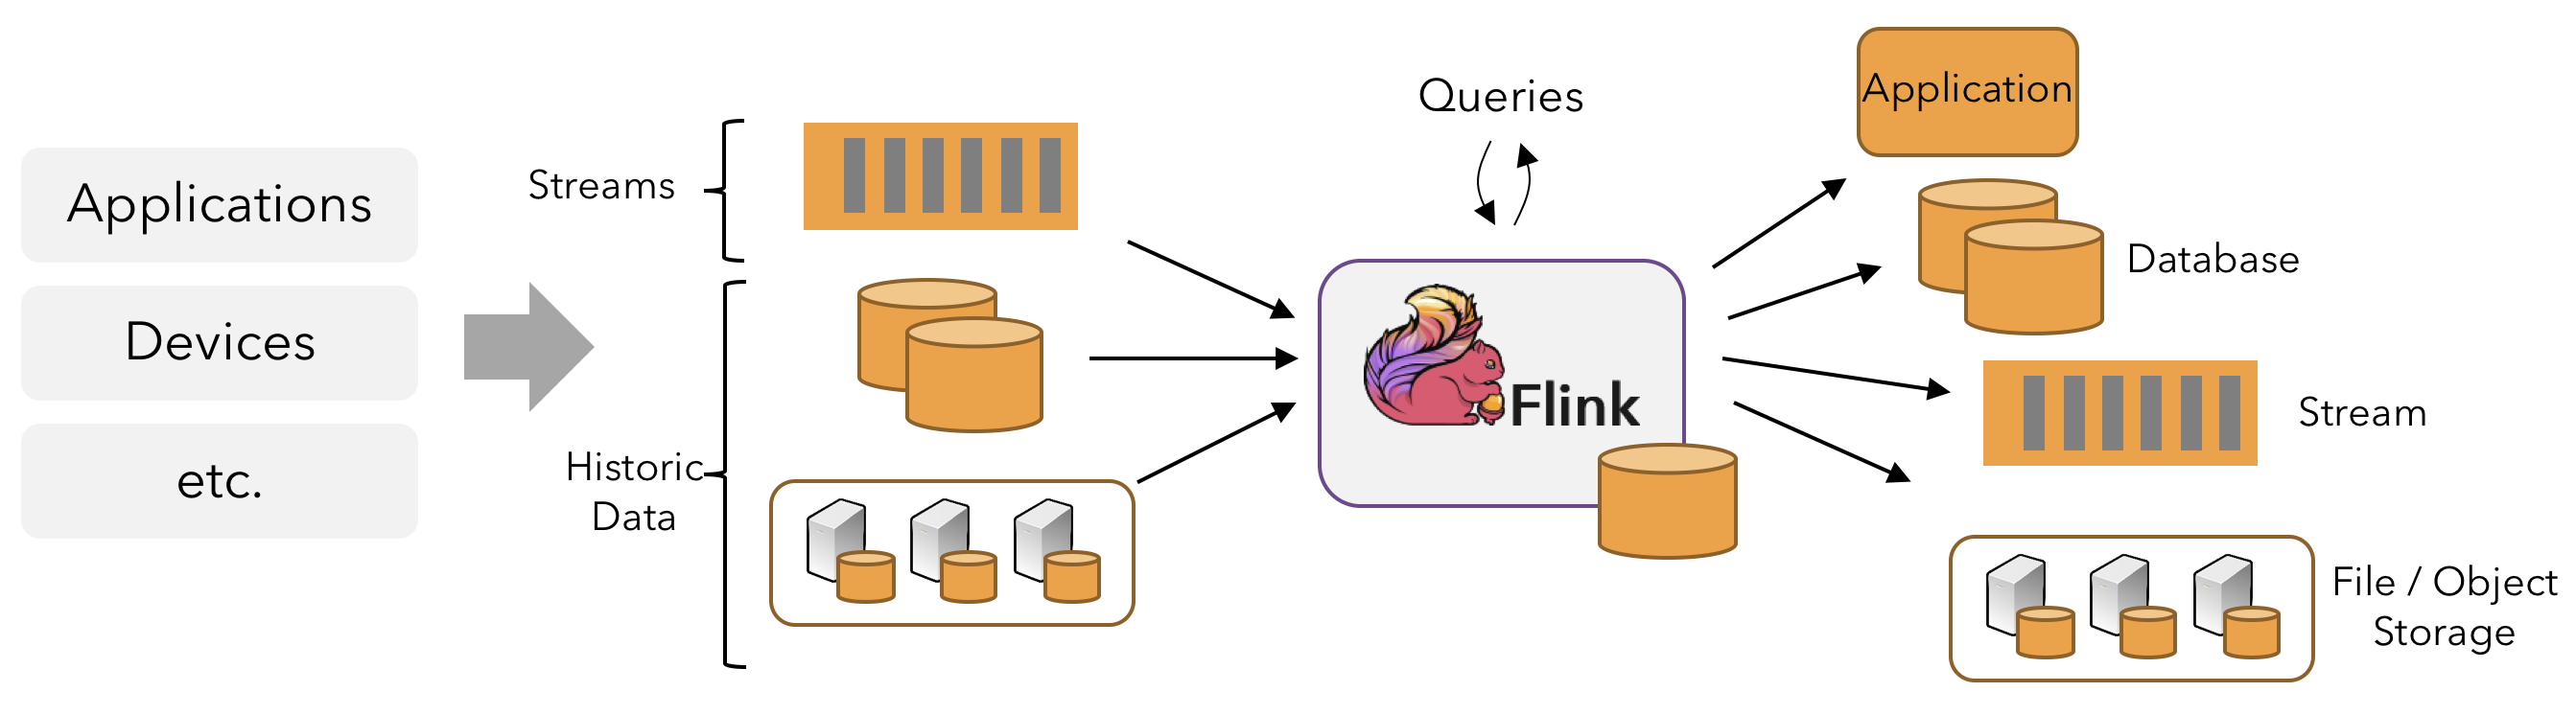 Flink application with sources and sinks